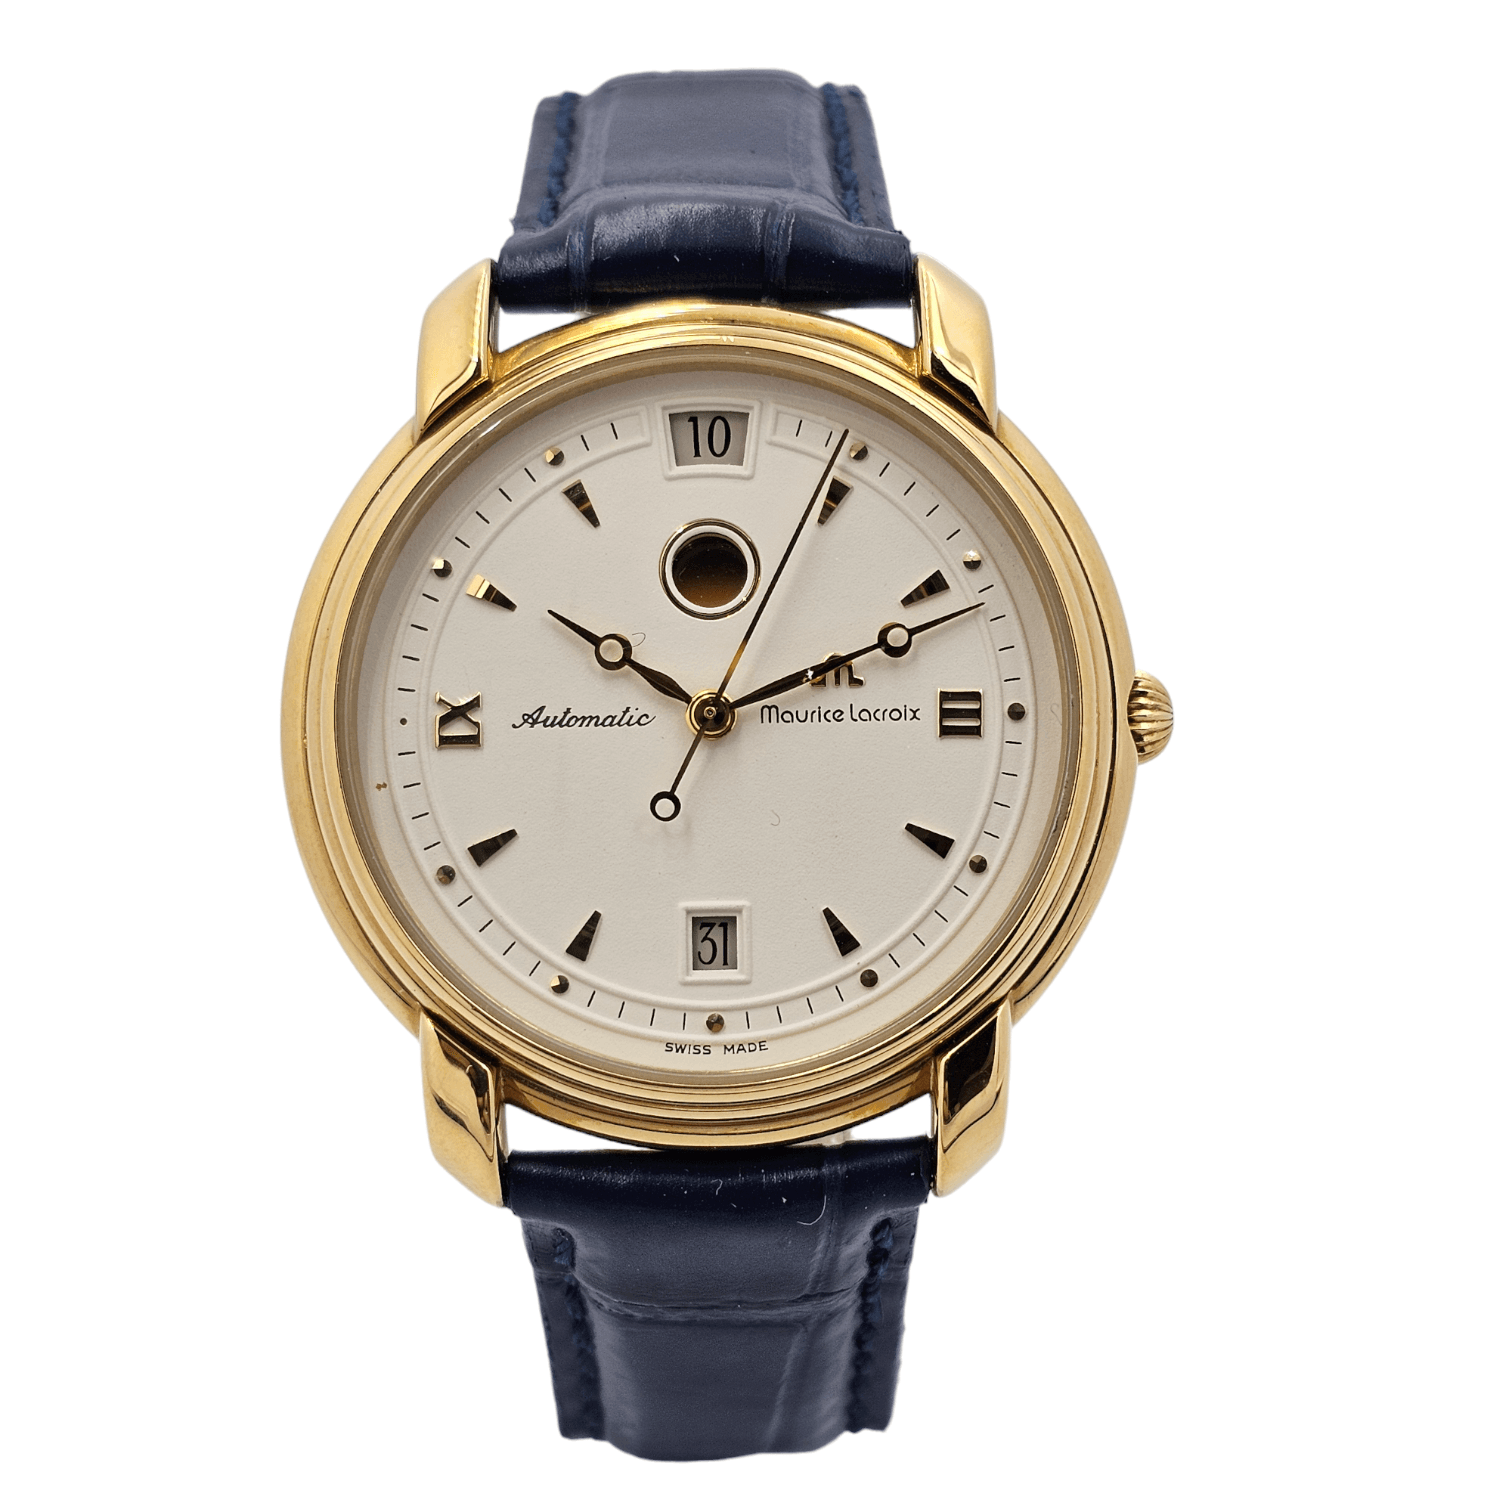 Maurice Lacroix Day&Night Dual time zone Ref. 29399/5309 - ON5944 - LuxuryInStock